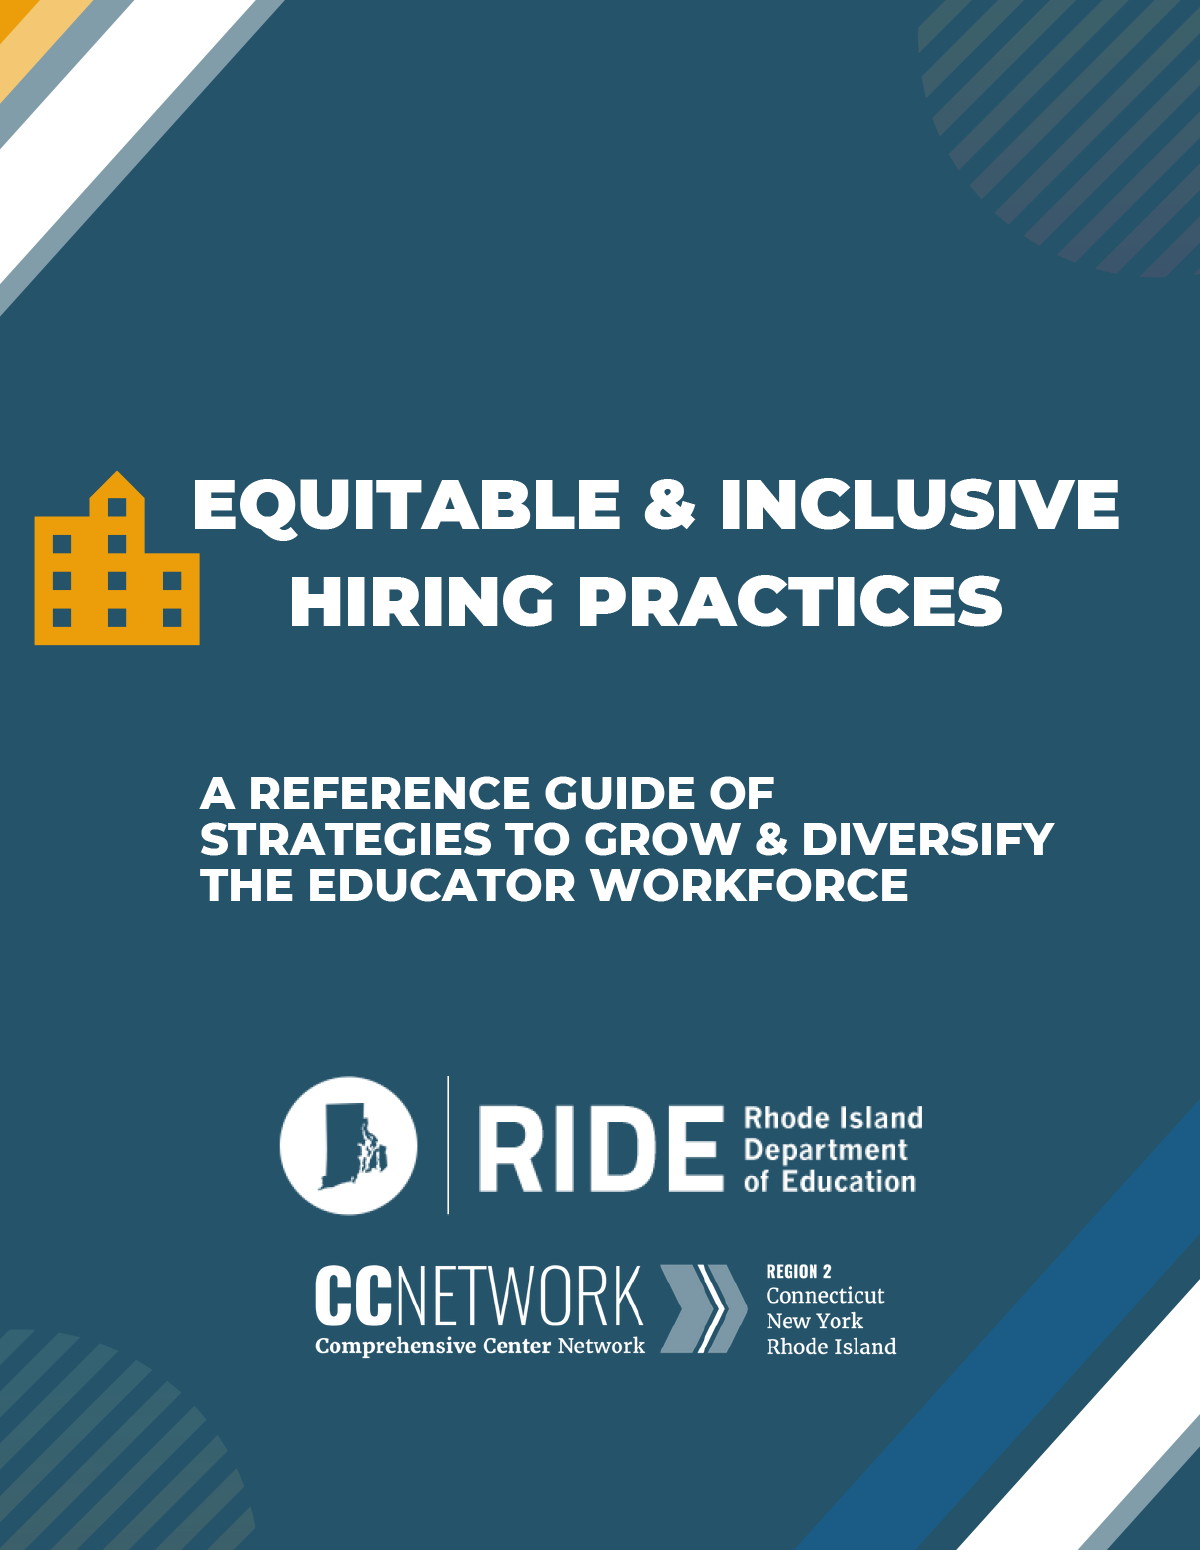 Equitable & Inclusive Hiring Practices: A Reference Guide of Strategies to Grow & Diversify the Educator Workforce